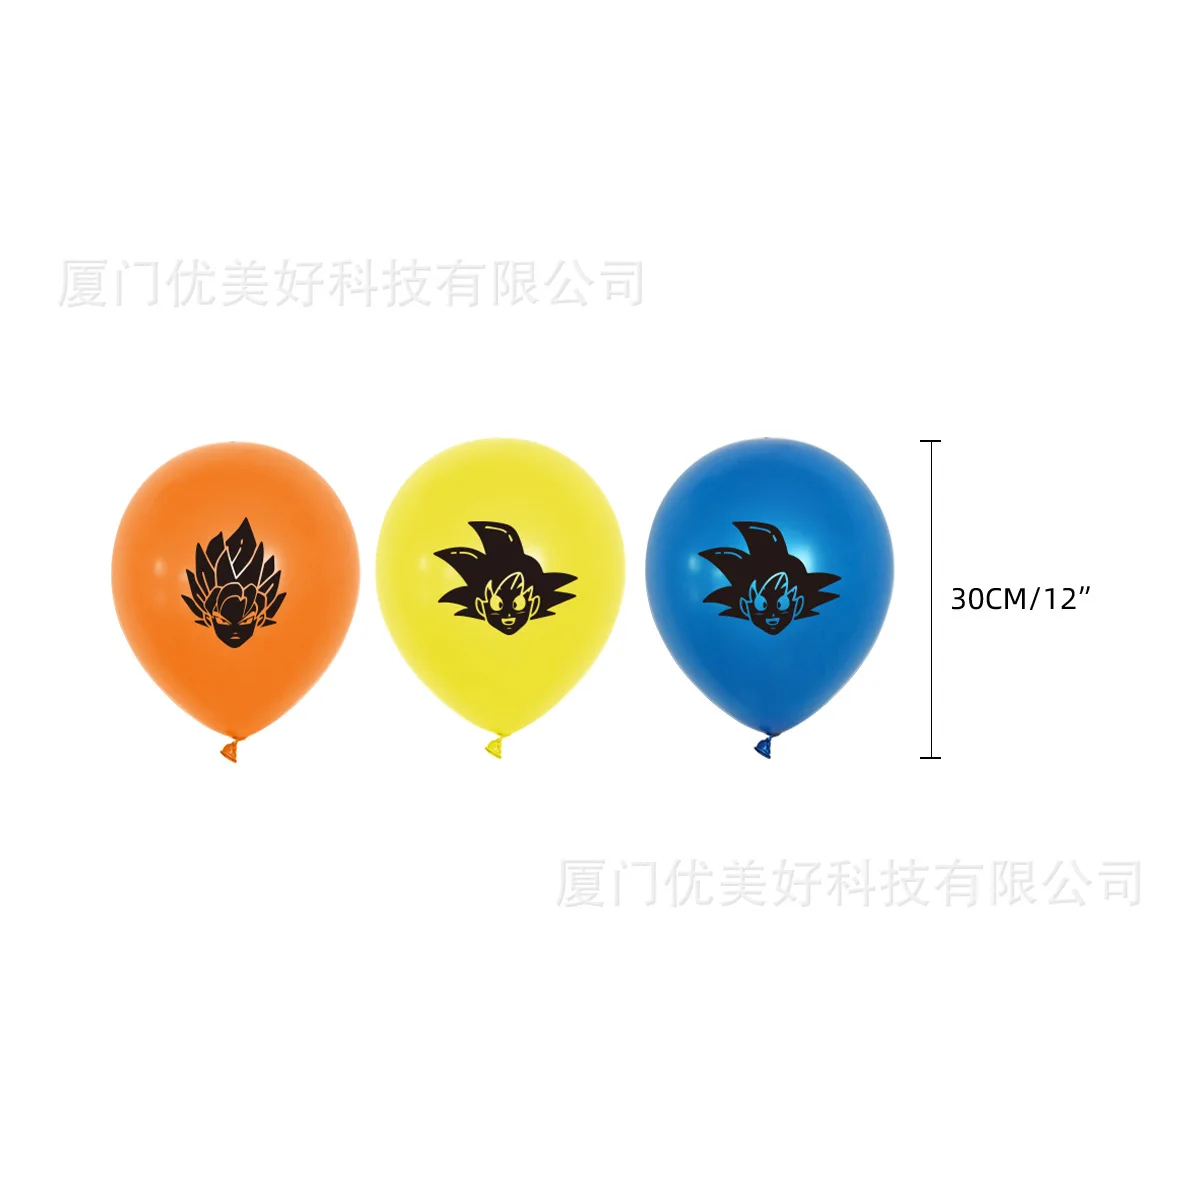 Dragon Ball Z Goku Birthday Party Tool Props Straw Banner Cake parties Supplies Decoration Boys Surprise Vegeta Beerus Balloons images - 6